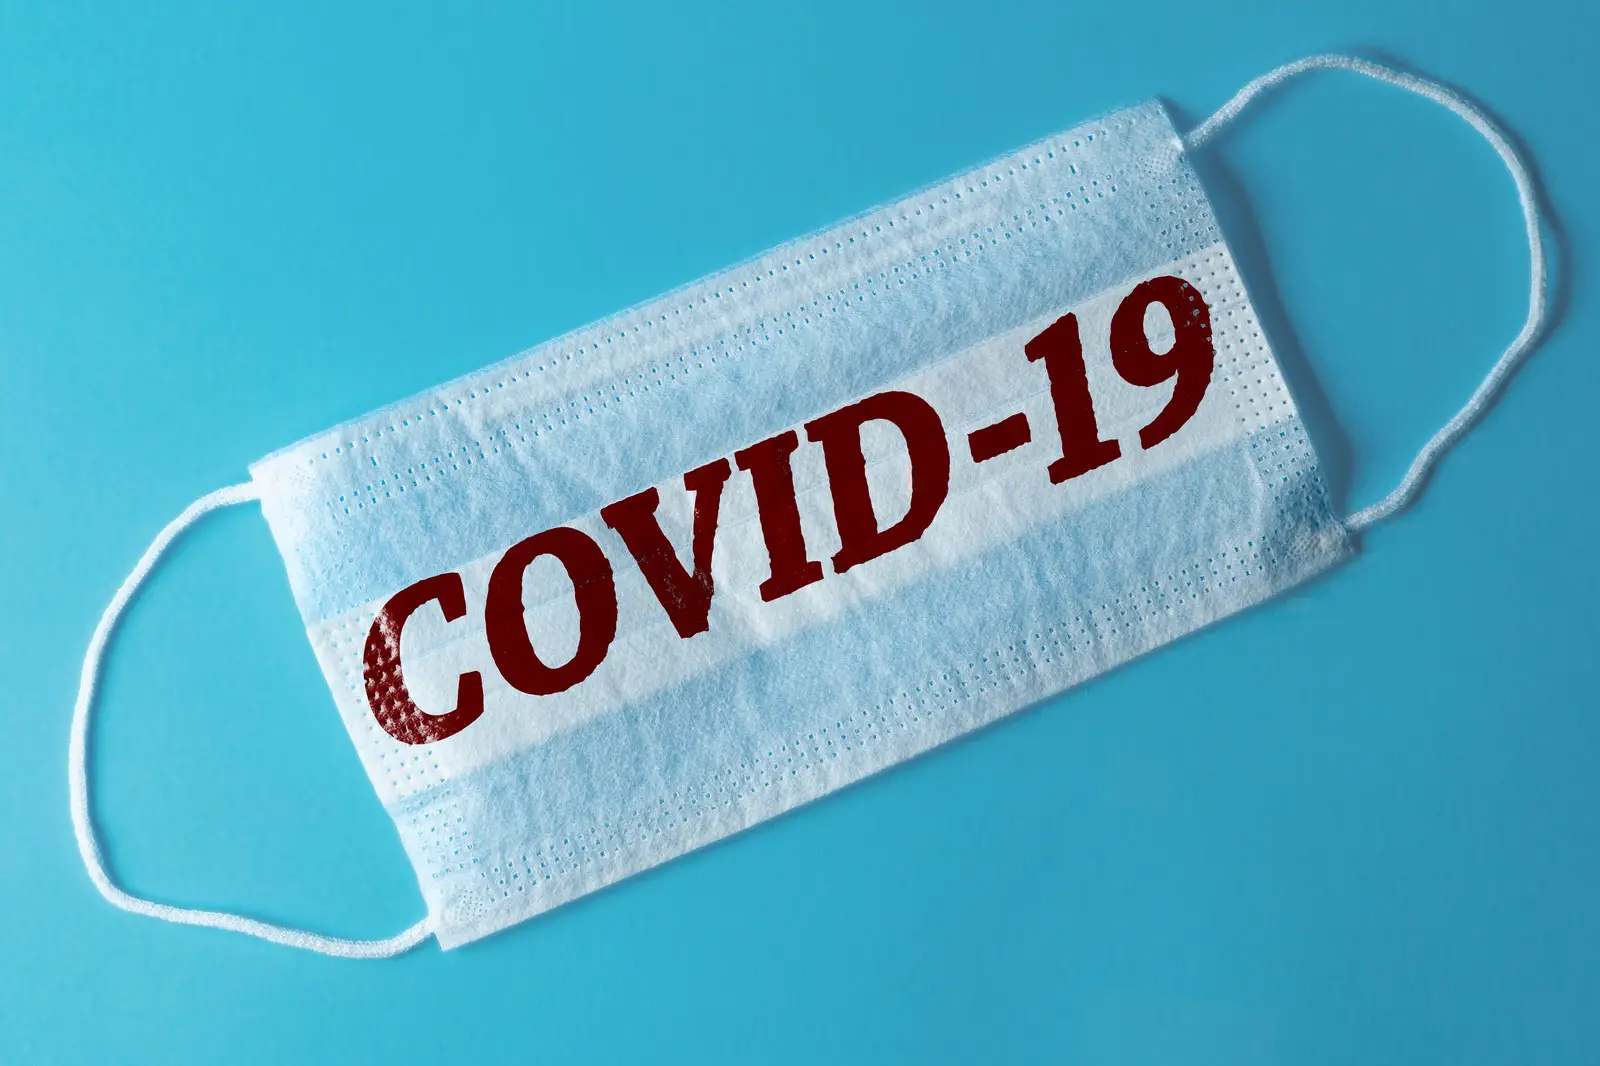 Face mask that says COVID-19 across it in red